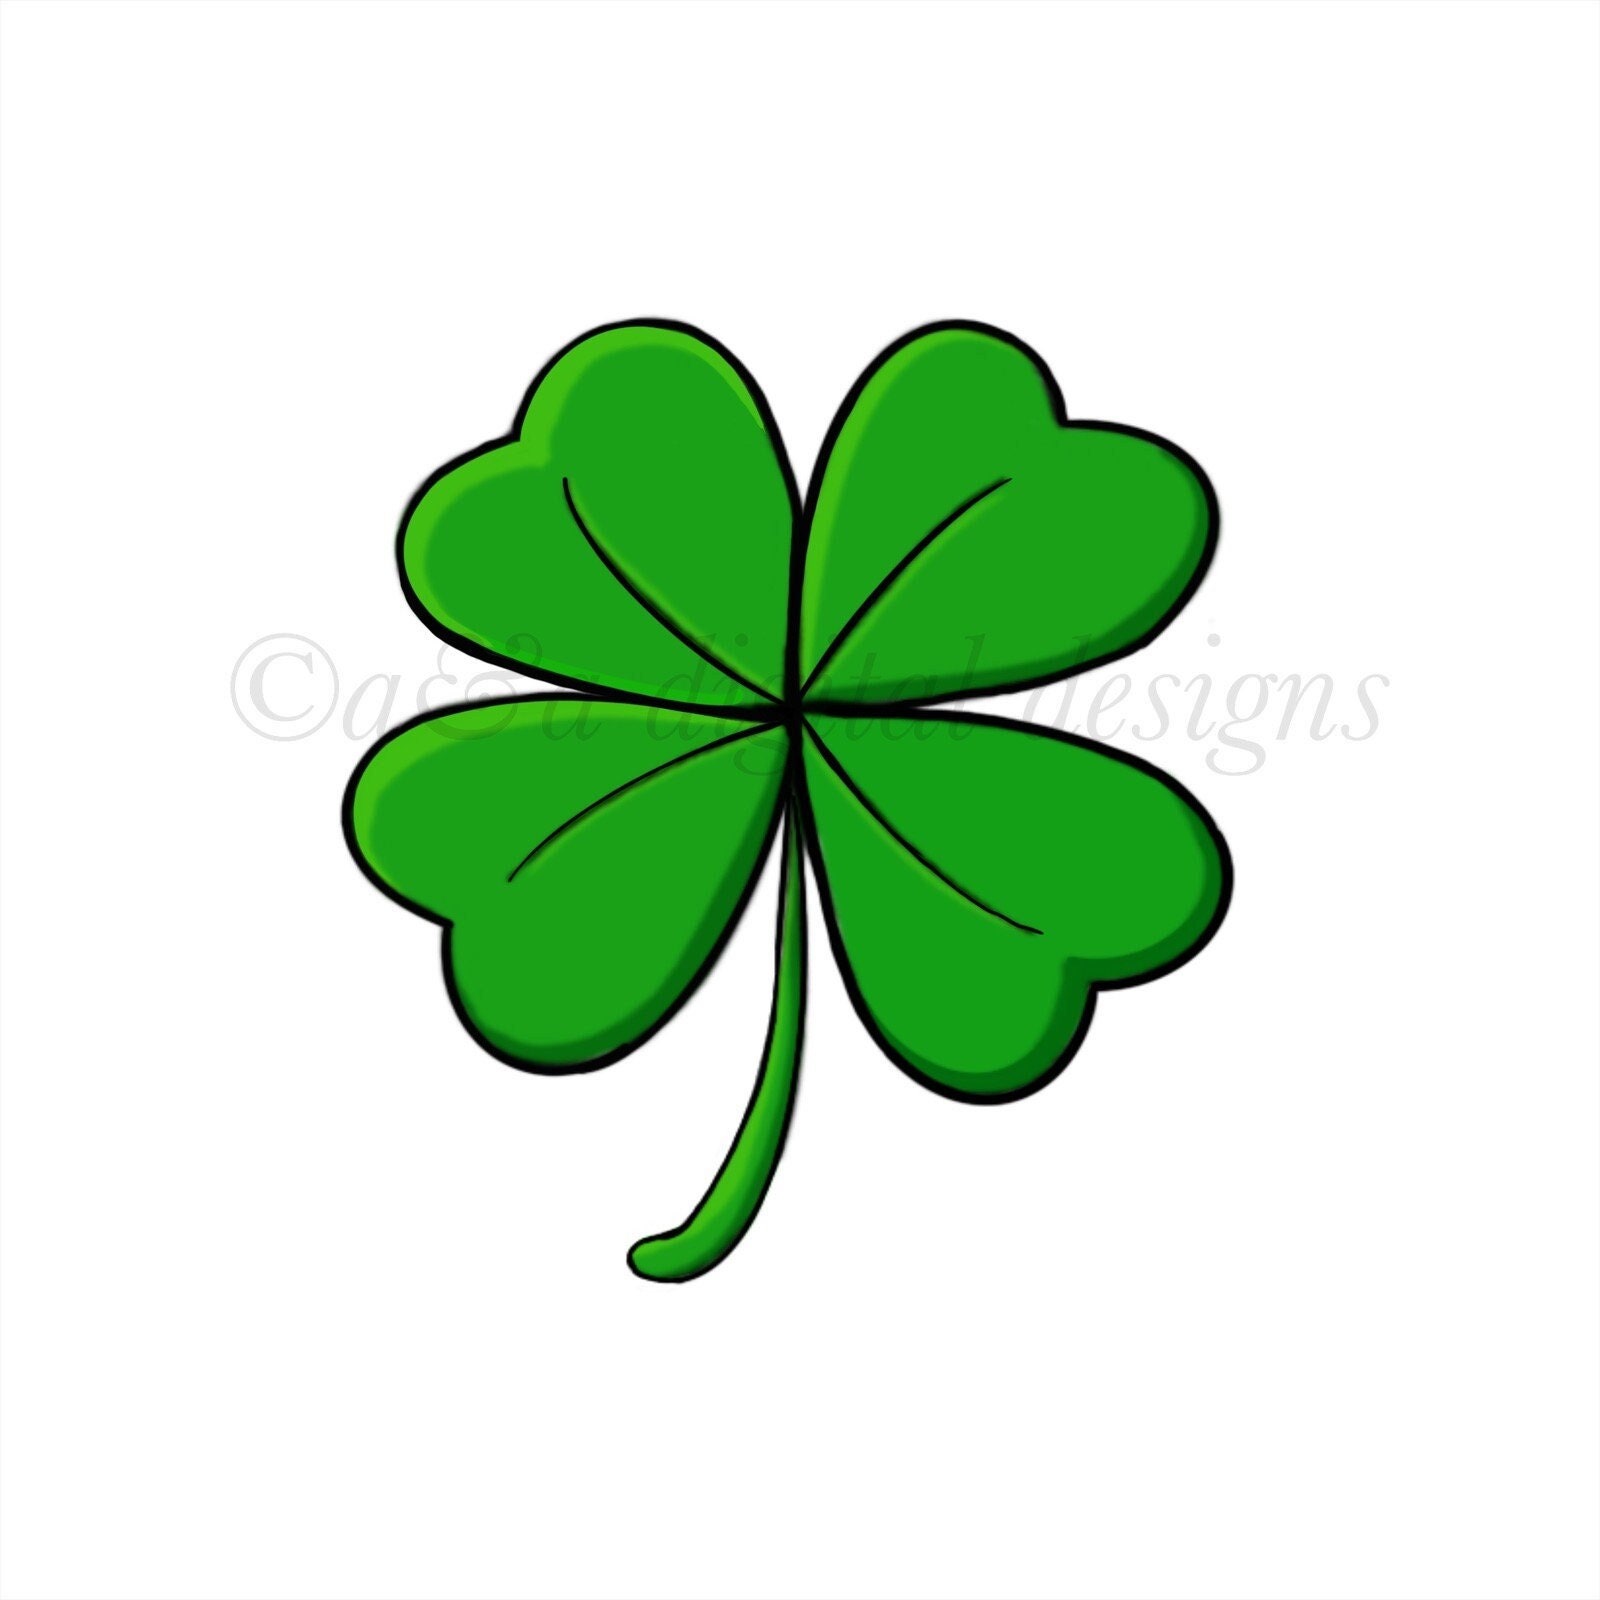 Four Leaf Clover Instant Digital Download, SVG, PNG, JPG Files, Hand Drawn,  St. Patricks Day Inspired Clipart -  Canada